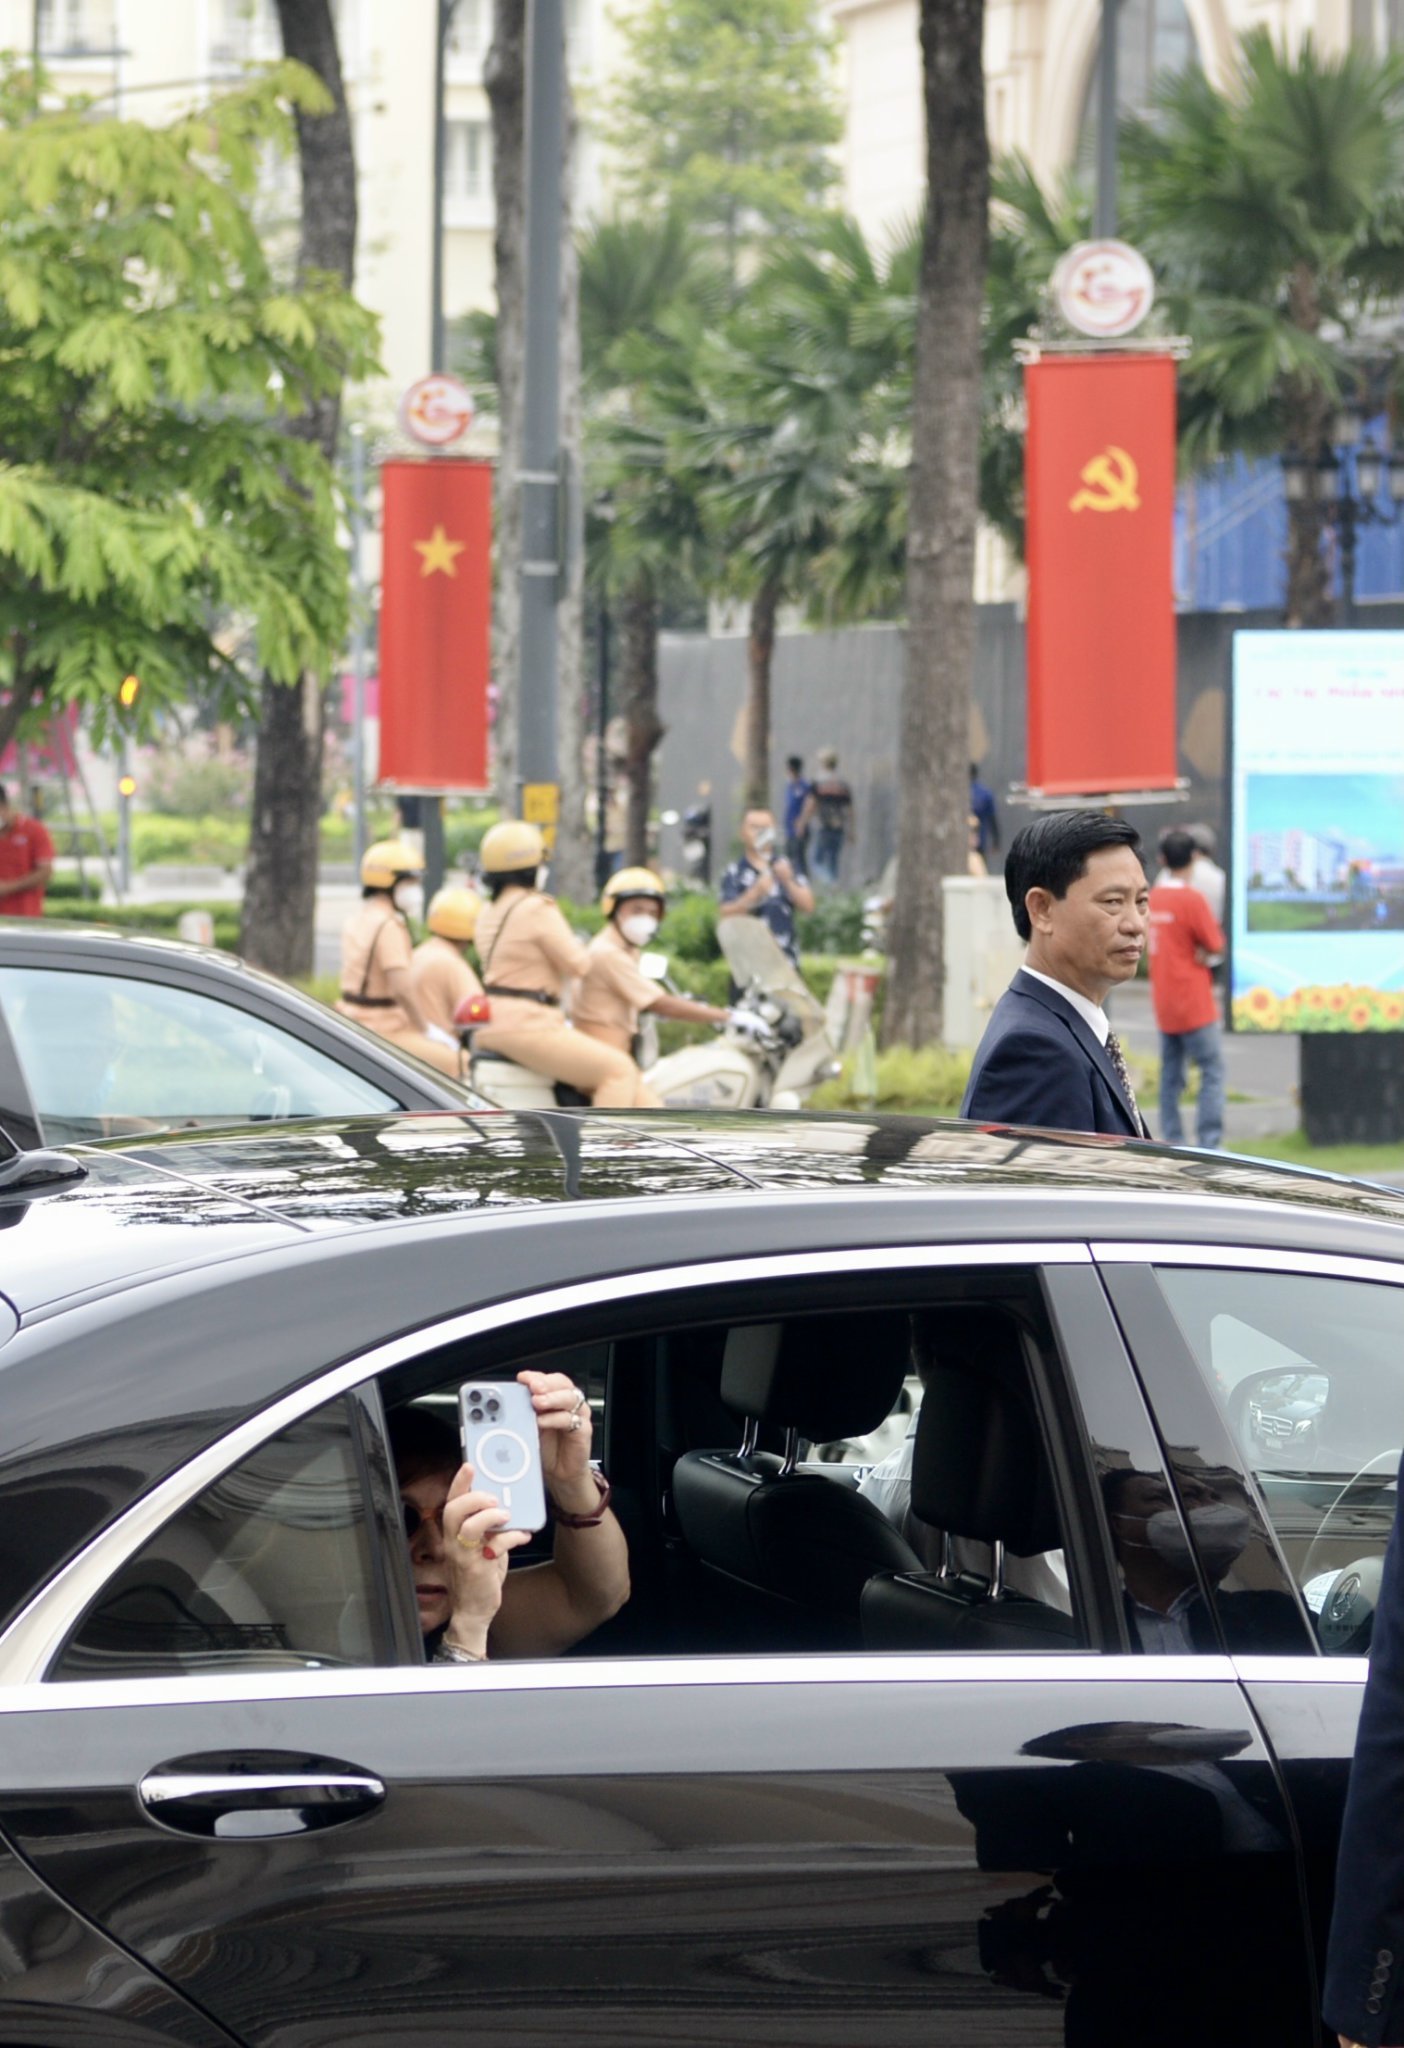 Greek President Katerina Sakellaropoulou takes a photo of the Municipal Theater in Ho Chi Minh City as she leaves on her car, May 19, 2022. Photo: T.T.D. / Tuoi Tre